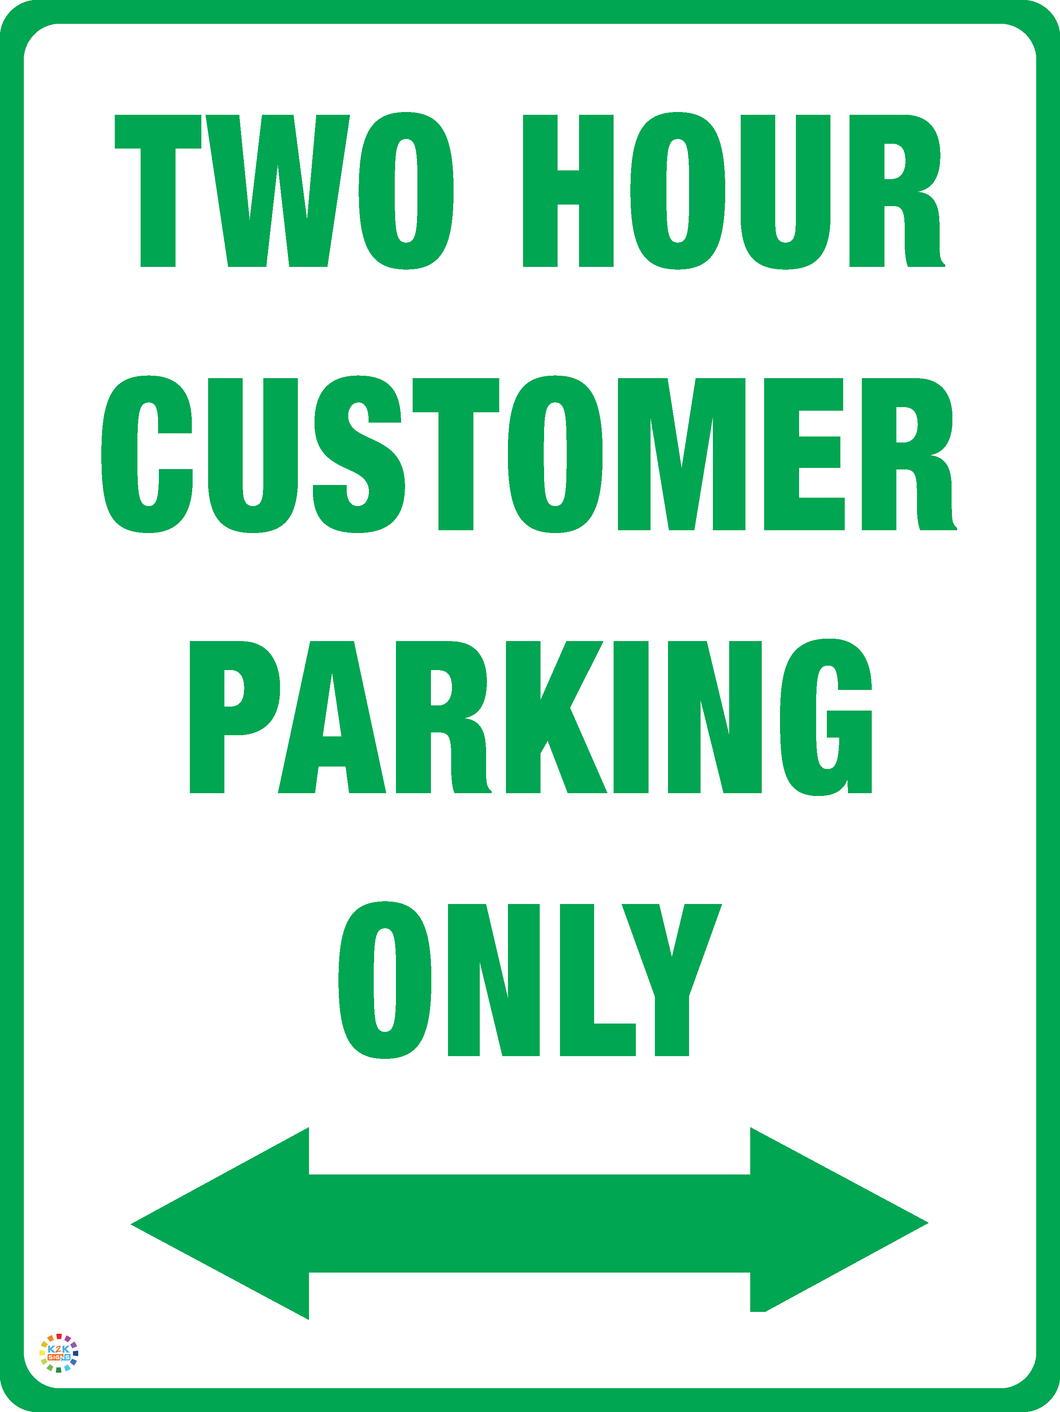 Two Hour Customer Parking Only (Two Way Arrow) Sign